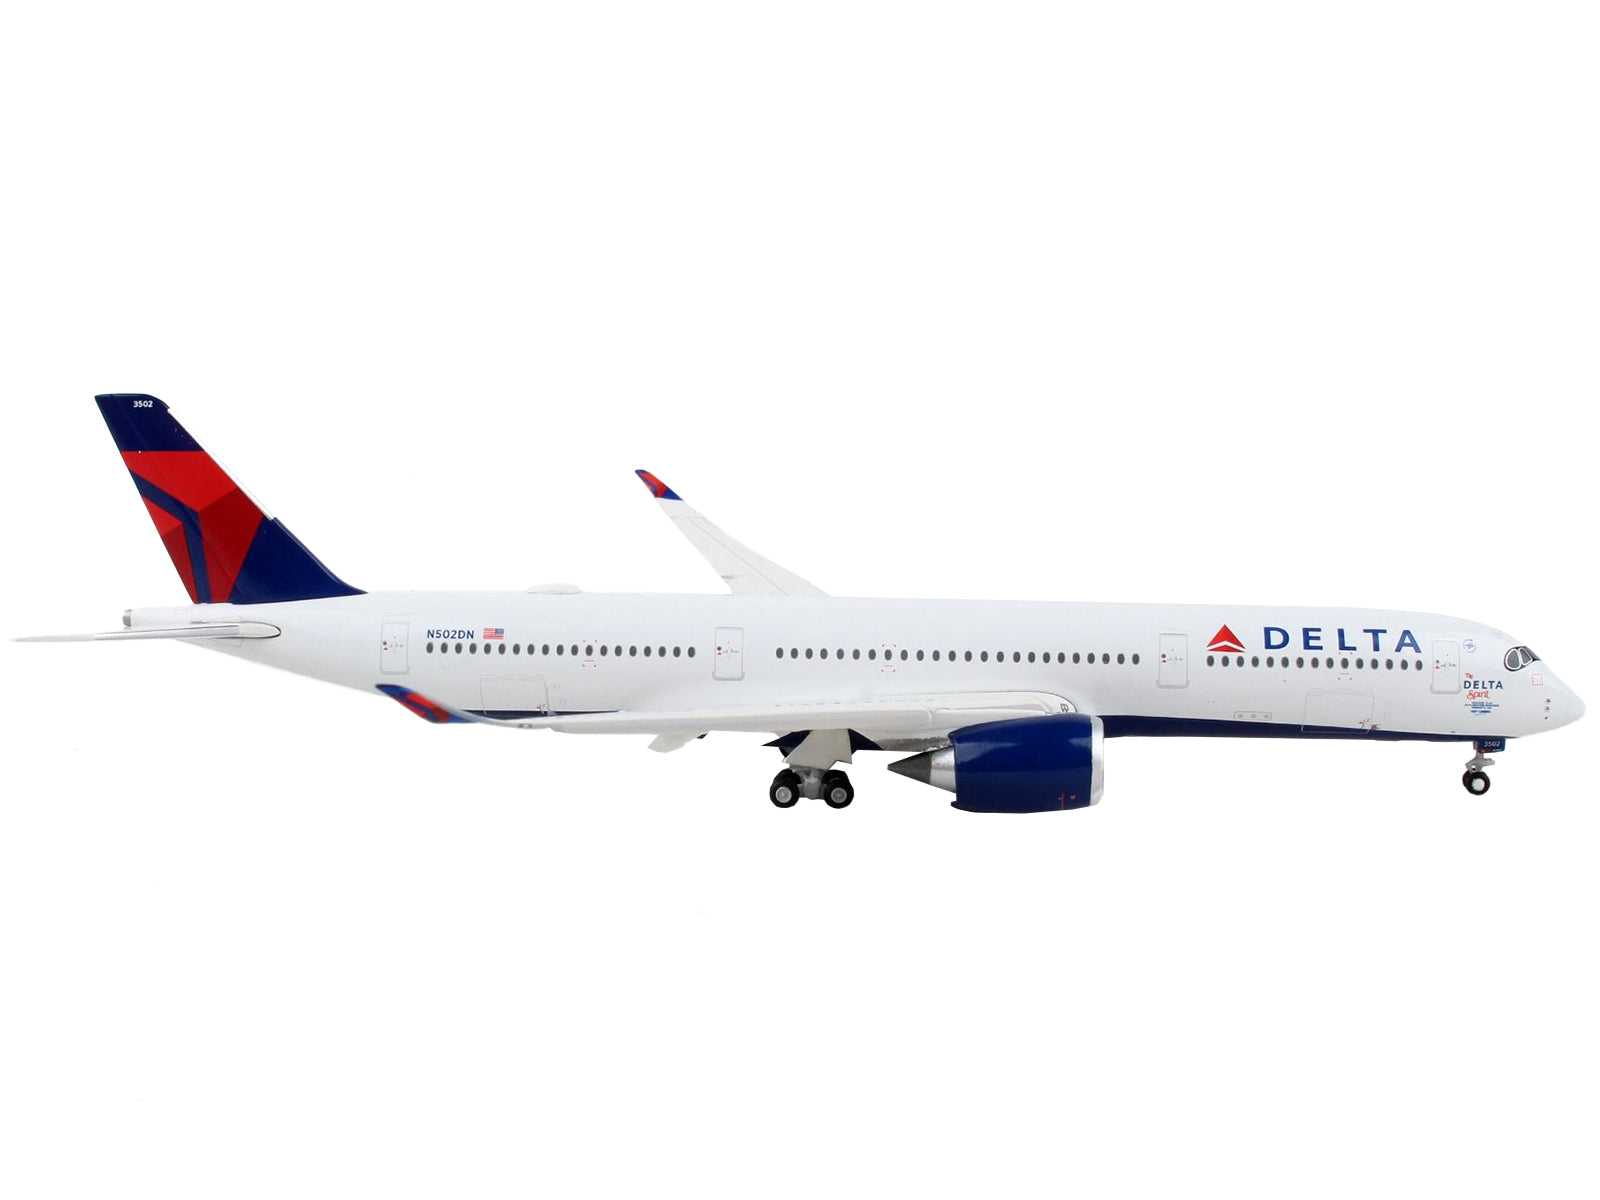 Airbus A350-900 Commercial Aircraft with Flaps Down "Delta Air Lines" White with Blue and Red Tail 1/400 Diecast Model Airplane by GeminiJets